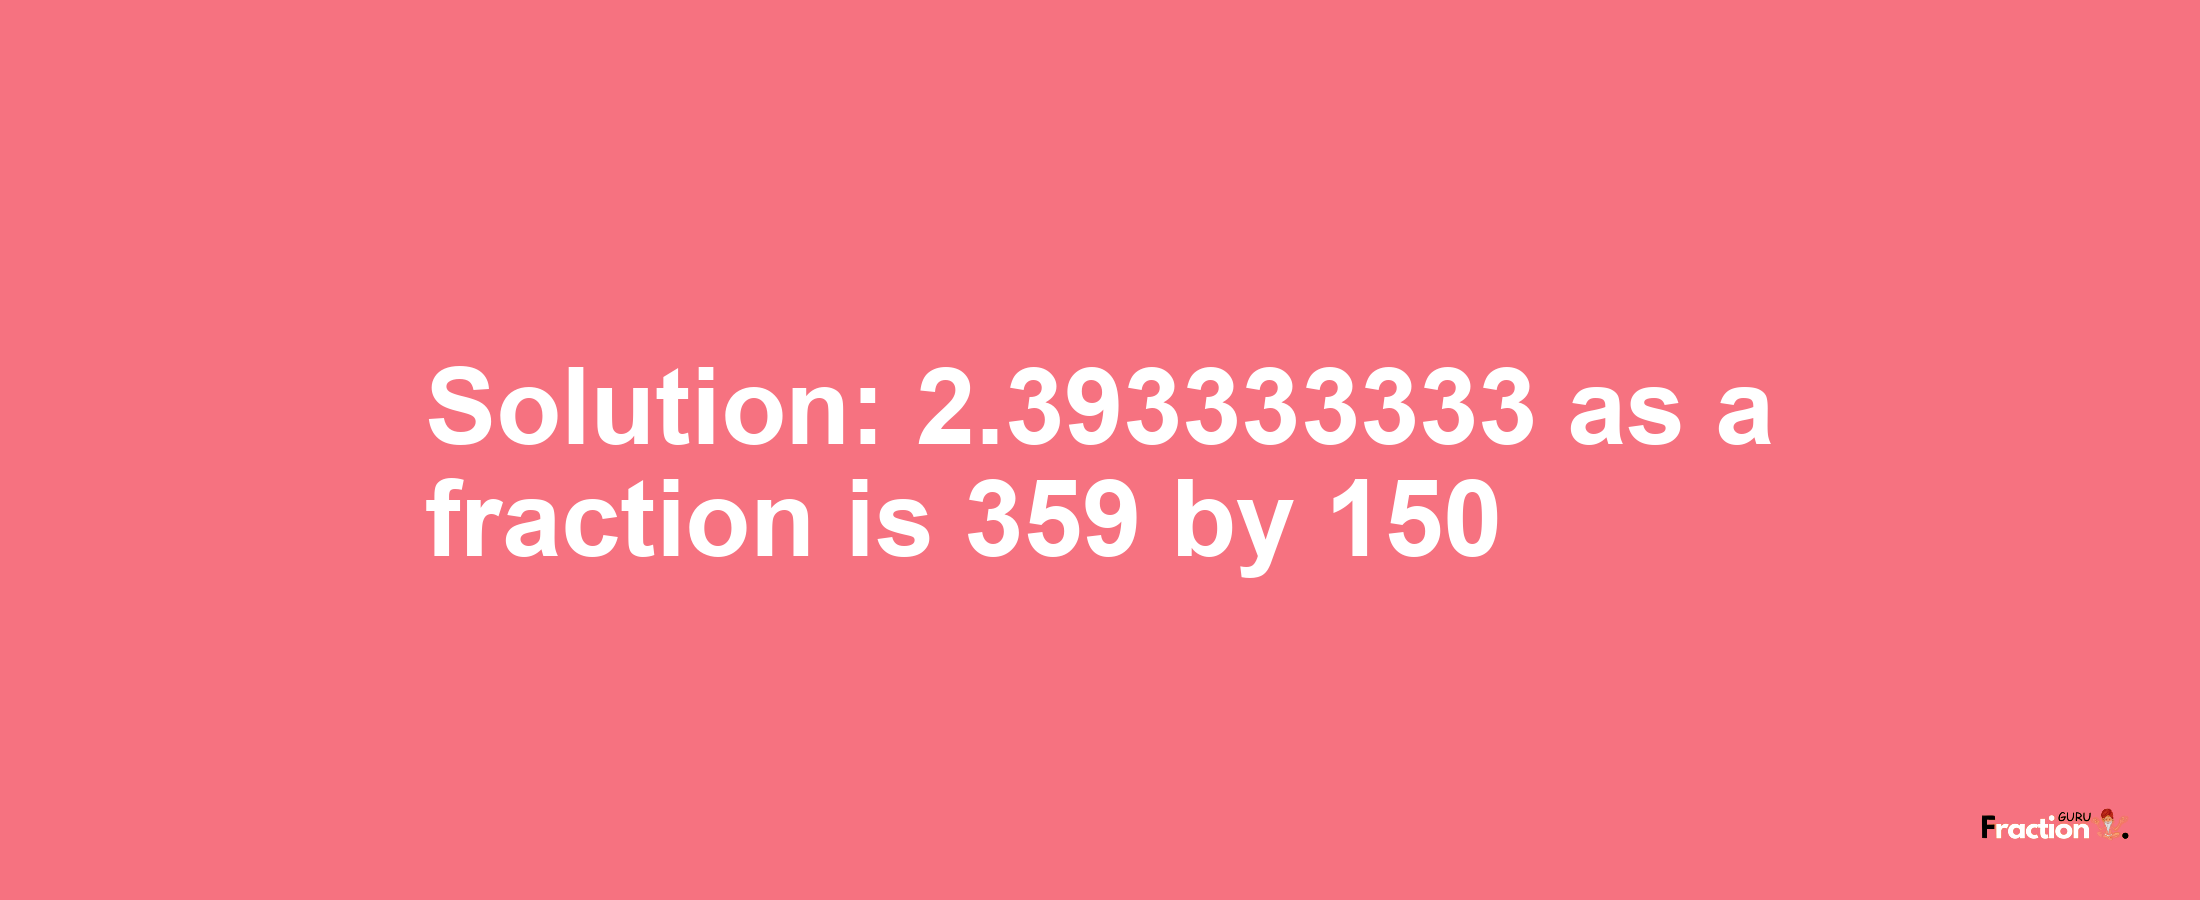 Solution:2.393333333 as a fraction is 359/150